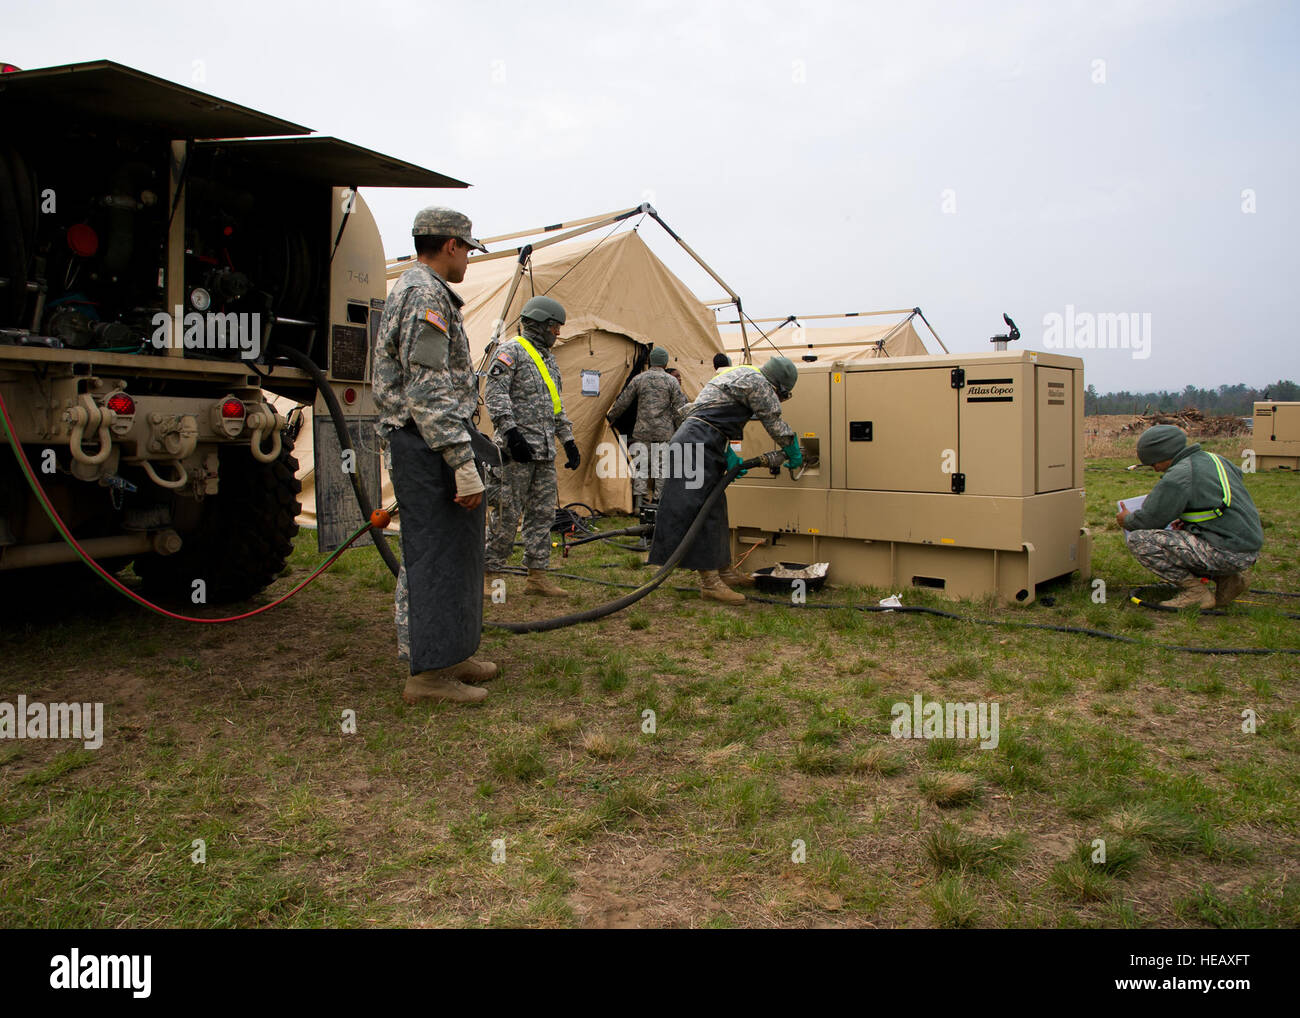 us-army-soldiers-fuel-up-a-generator-which-provides-heat-to-the-tents-HEAXFT.jpg